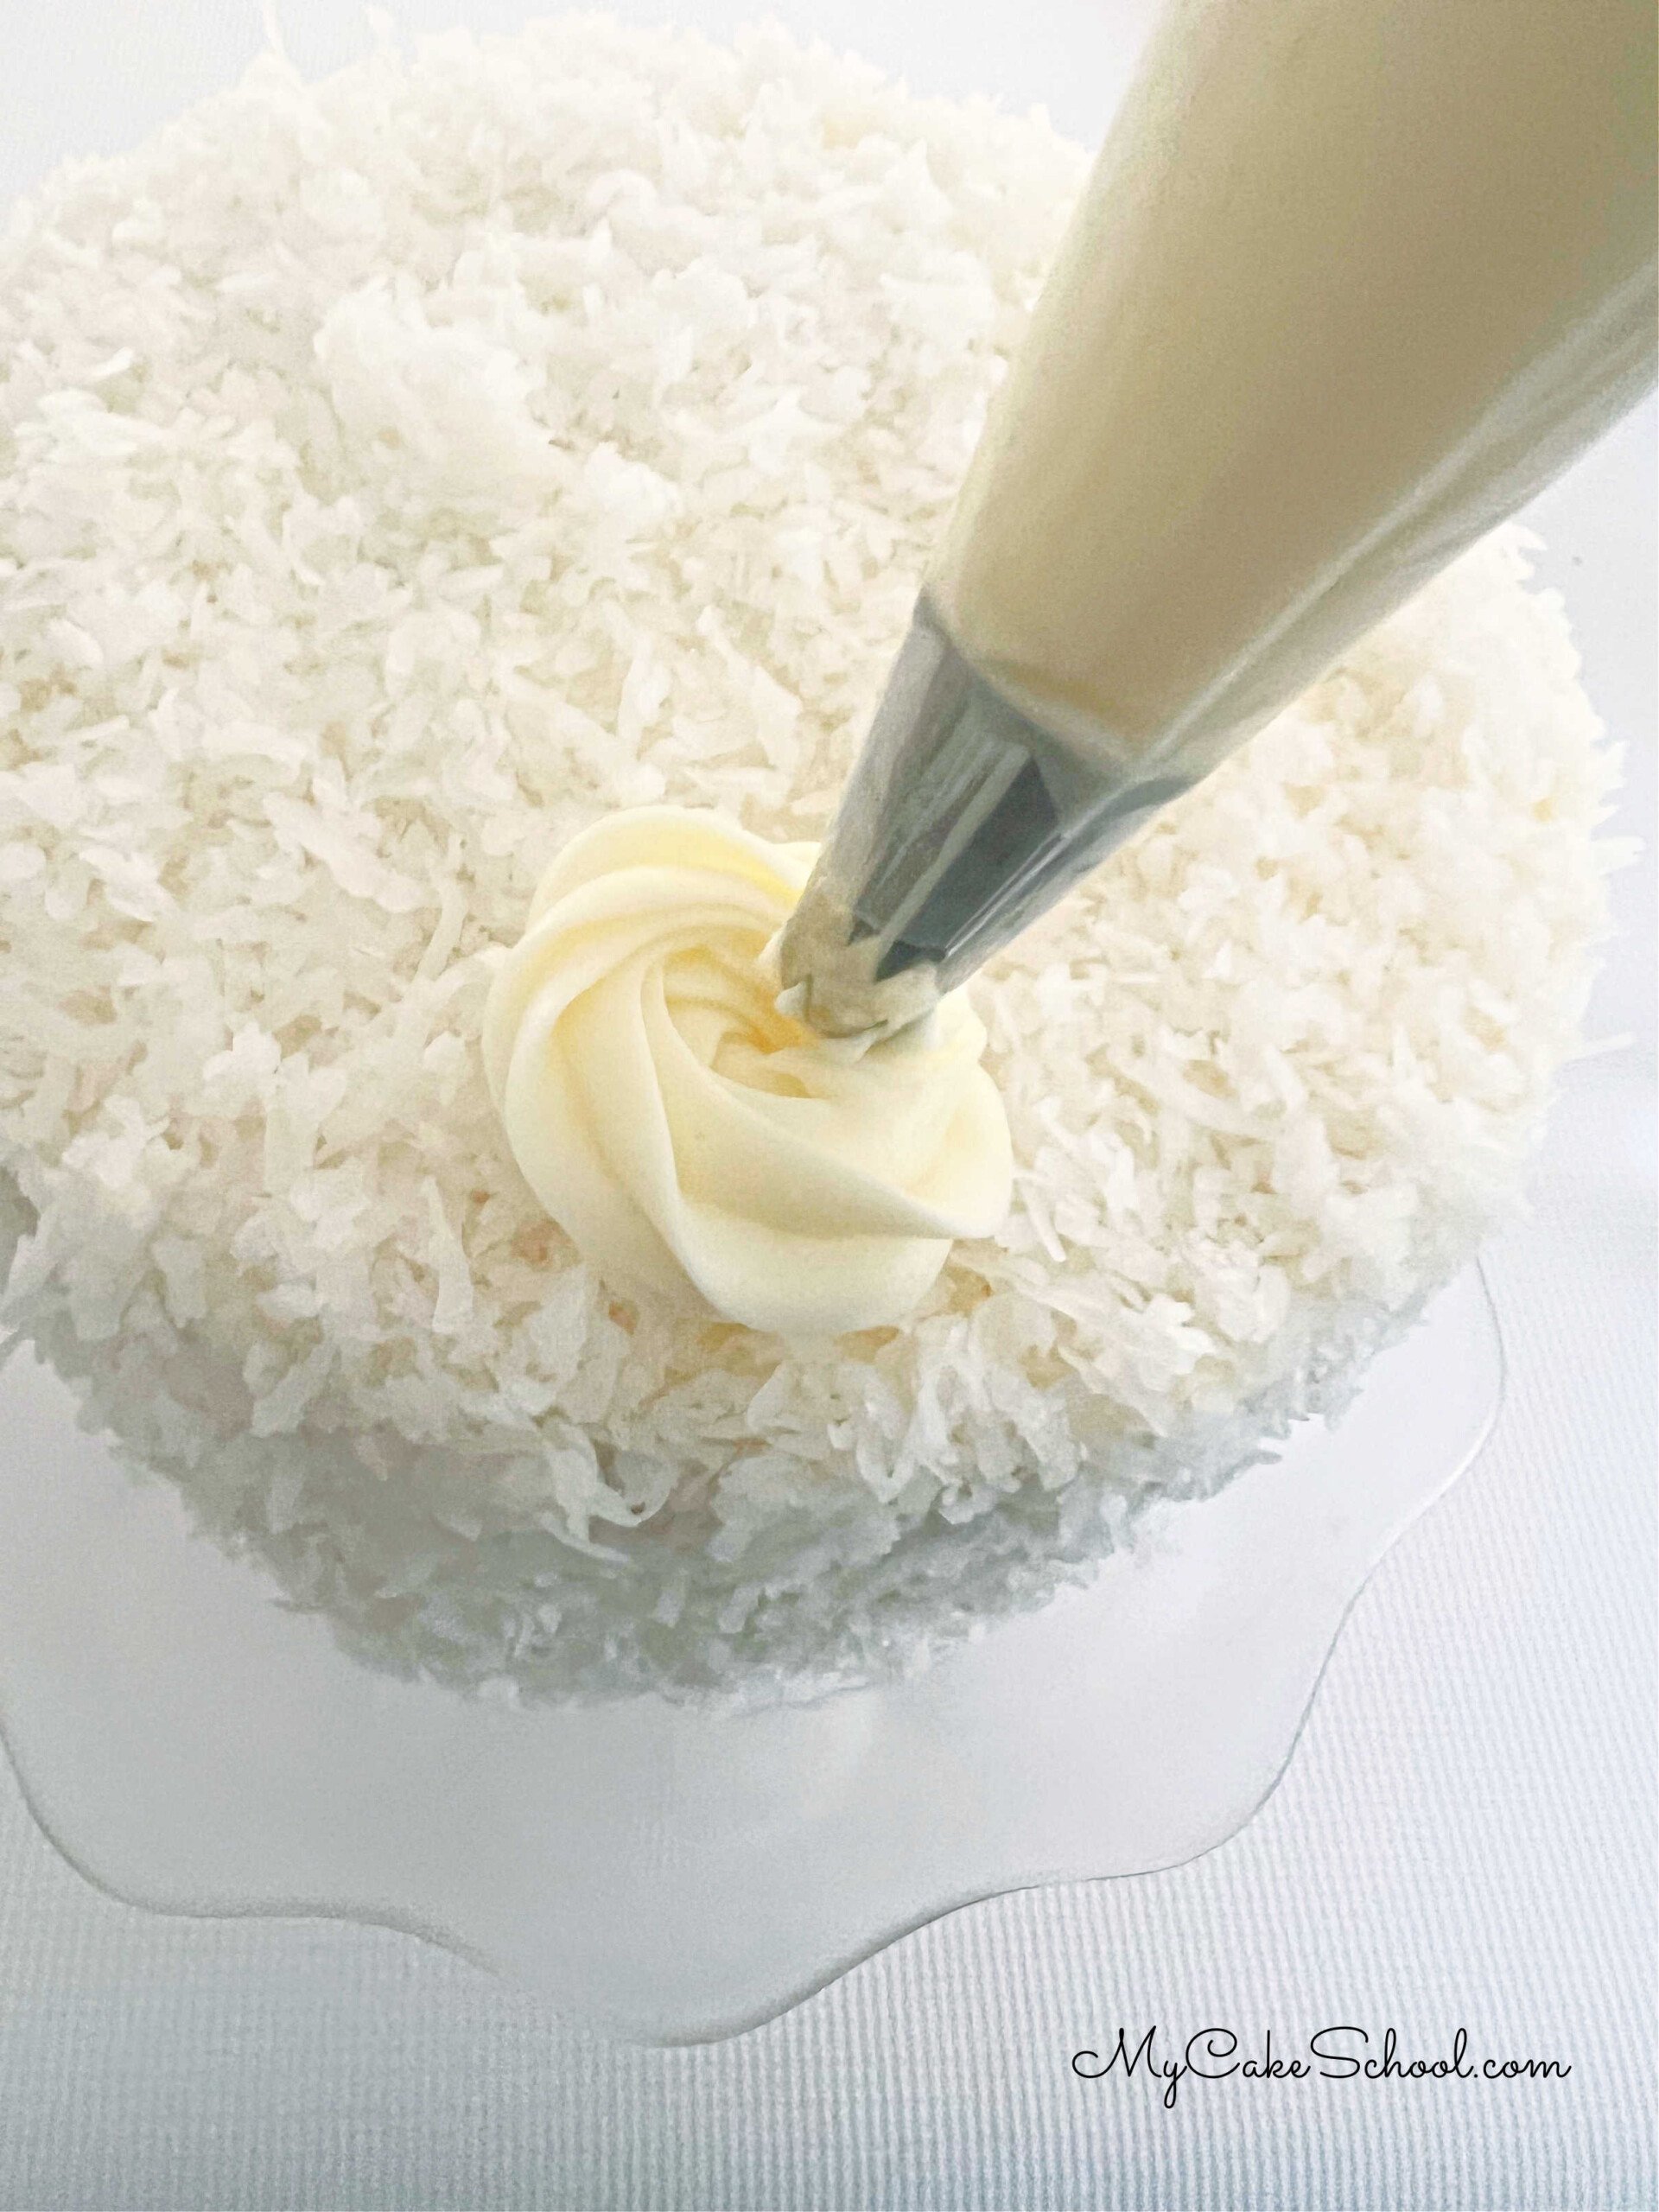 Piping a swirl of frosting onto the coconut-covered Pina Colada Cake.